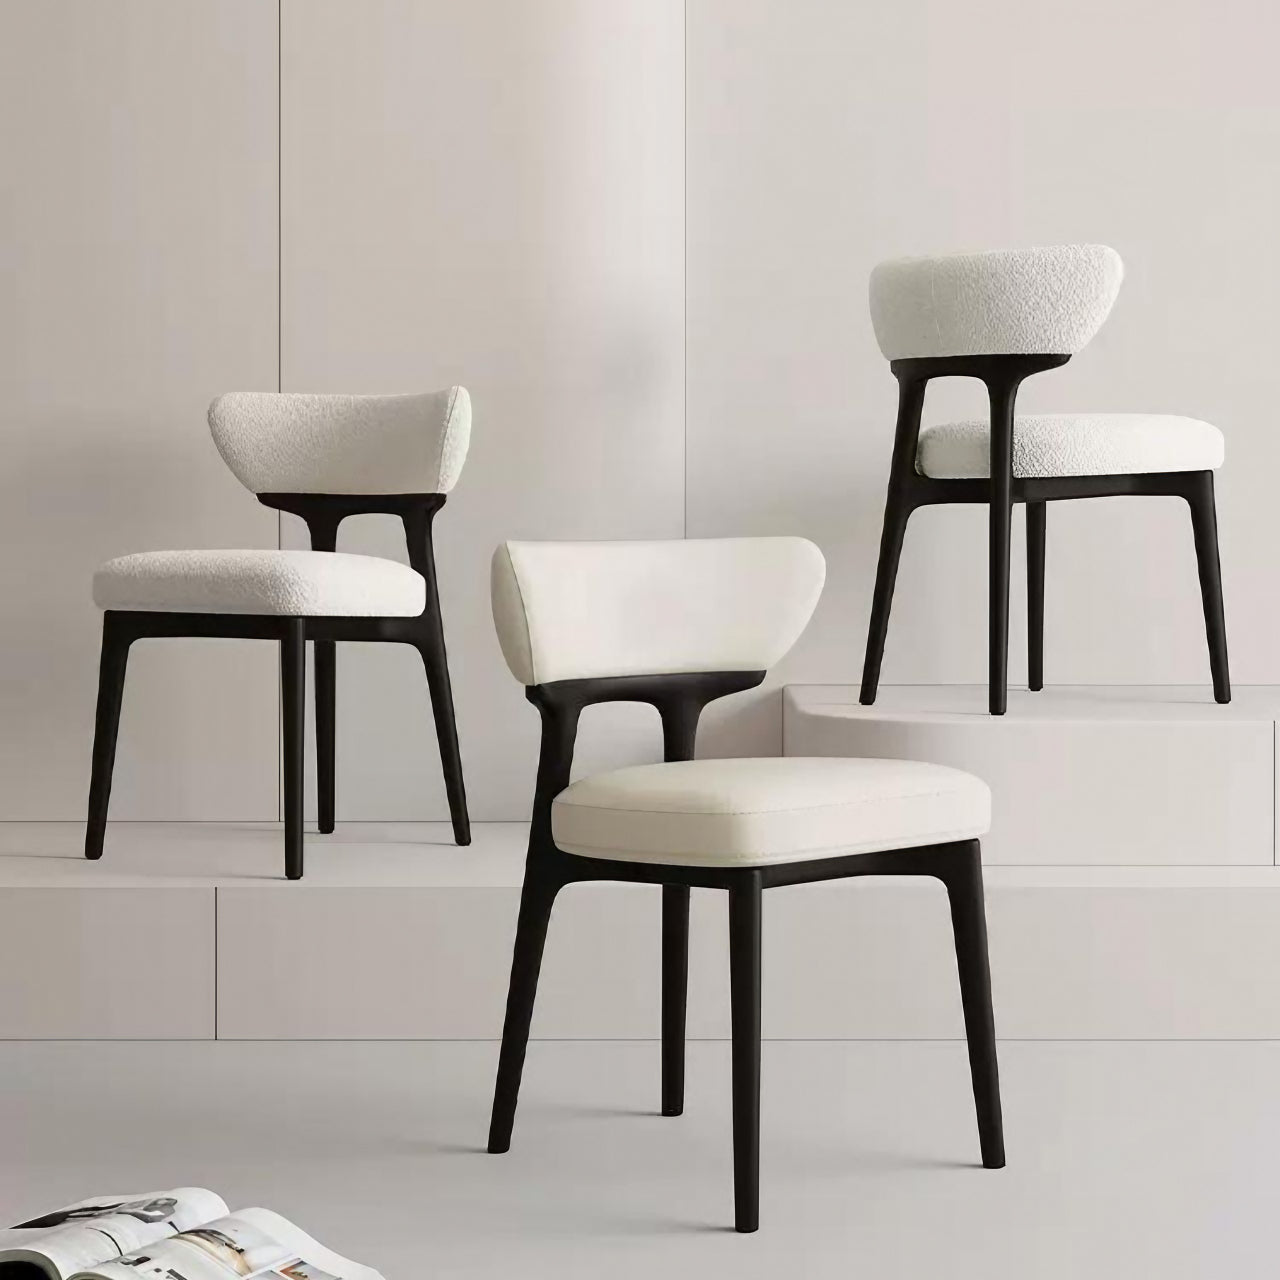 Elegant white modern minimalist dining chair with streamlined back